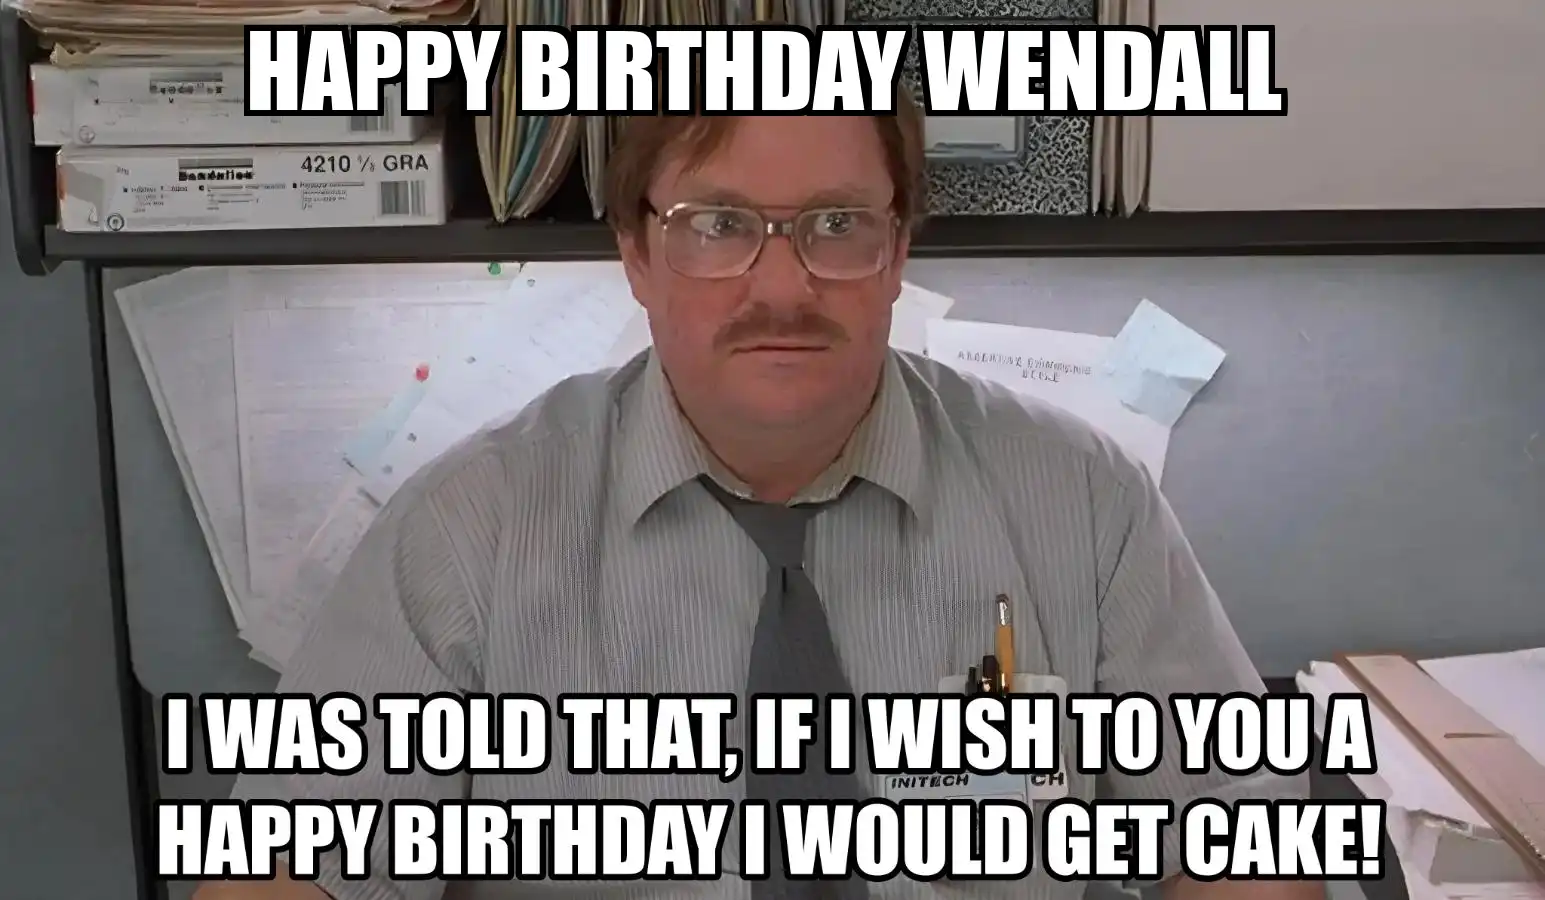 Happy Birthday Wendall I Would Get A Cake Meme